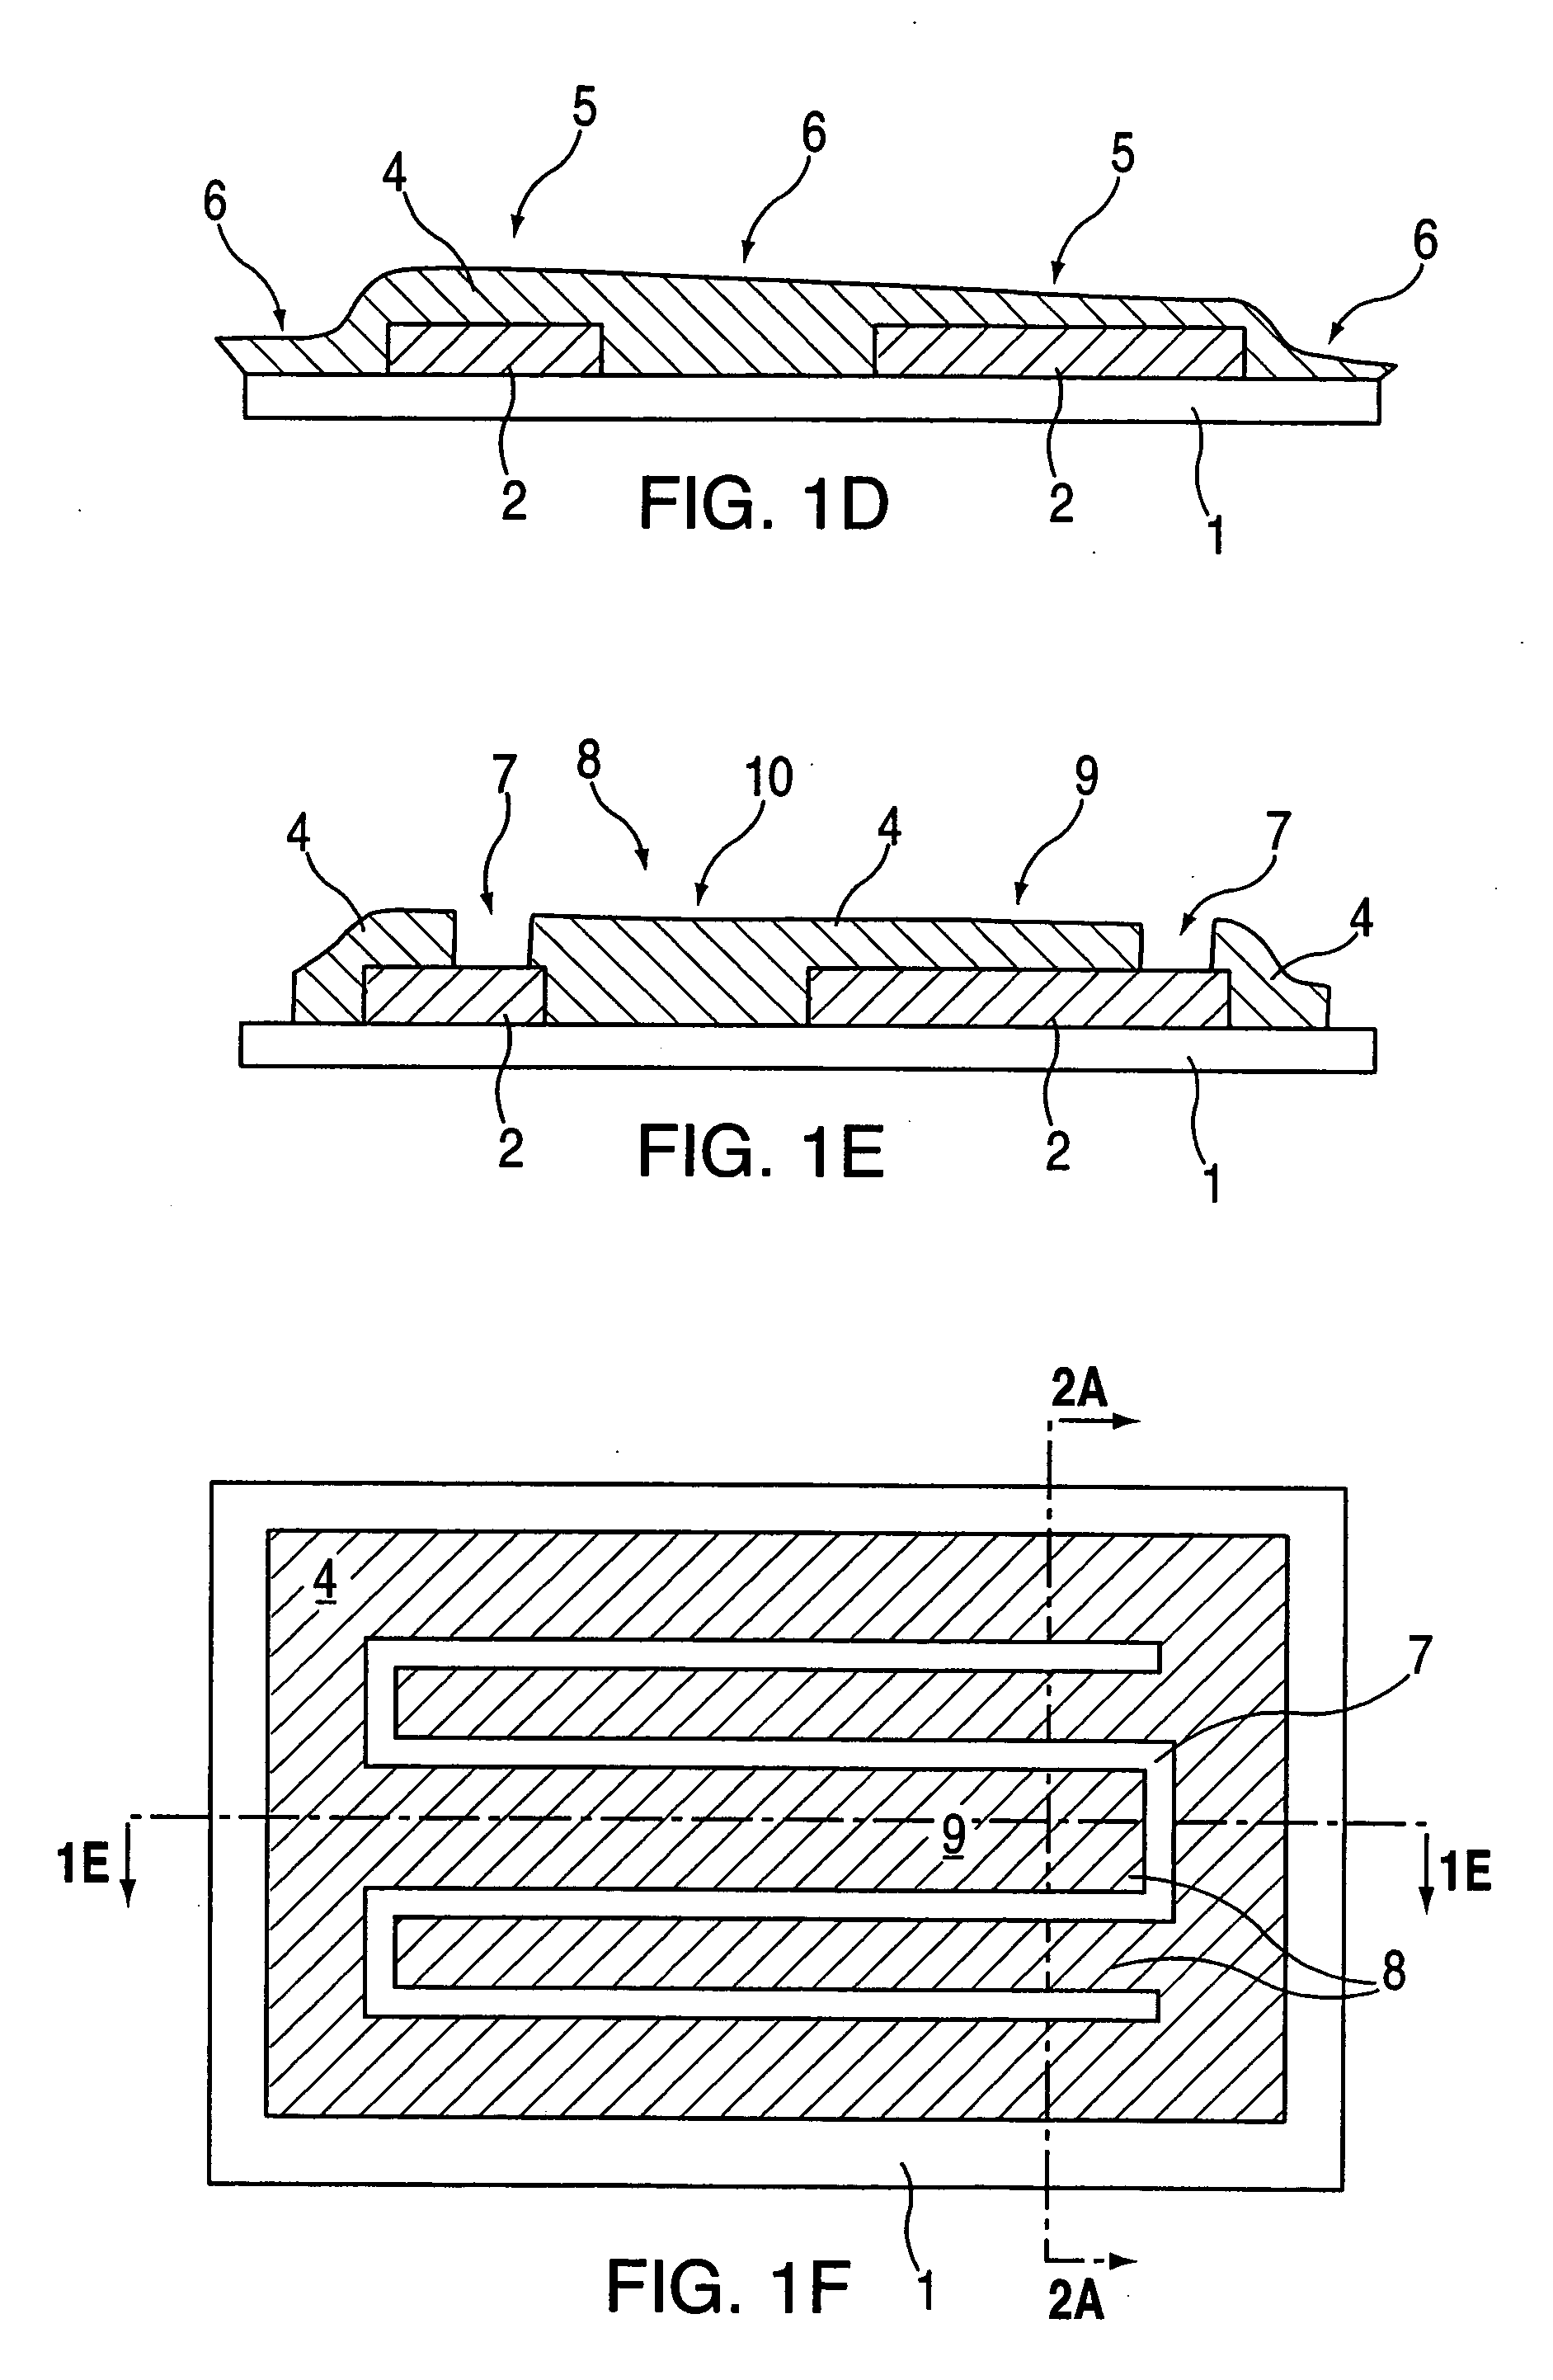 Gap tuning for surface micromachined structures in an epitaxial reactor